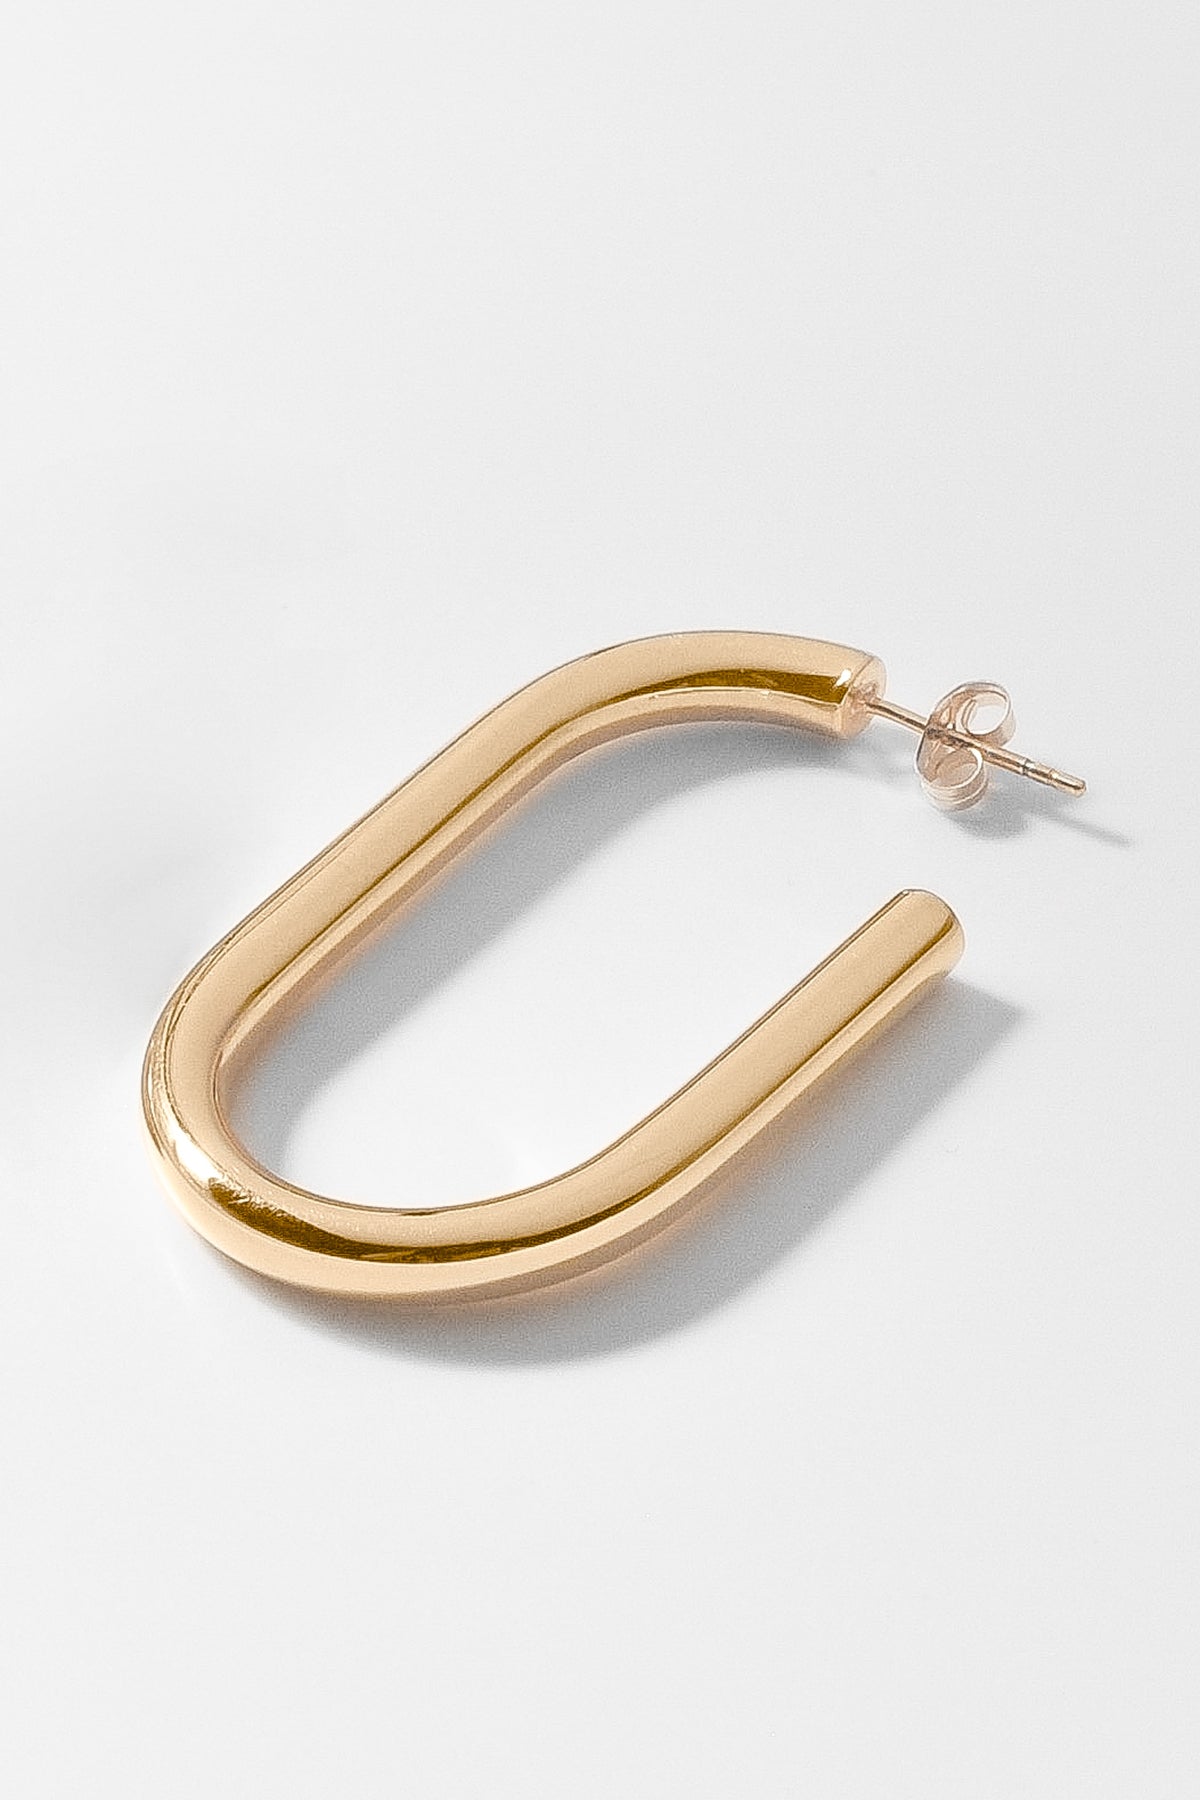   Athena Hoop Earring Gold by Thatch 